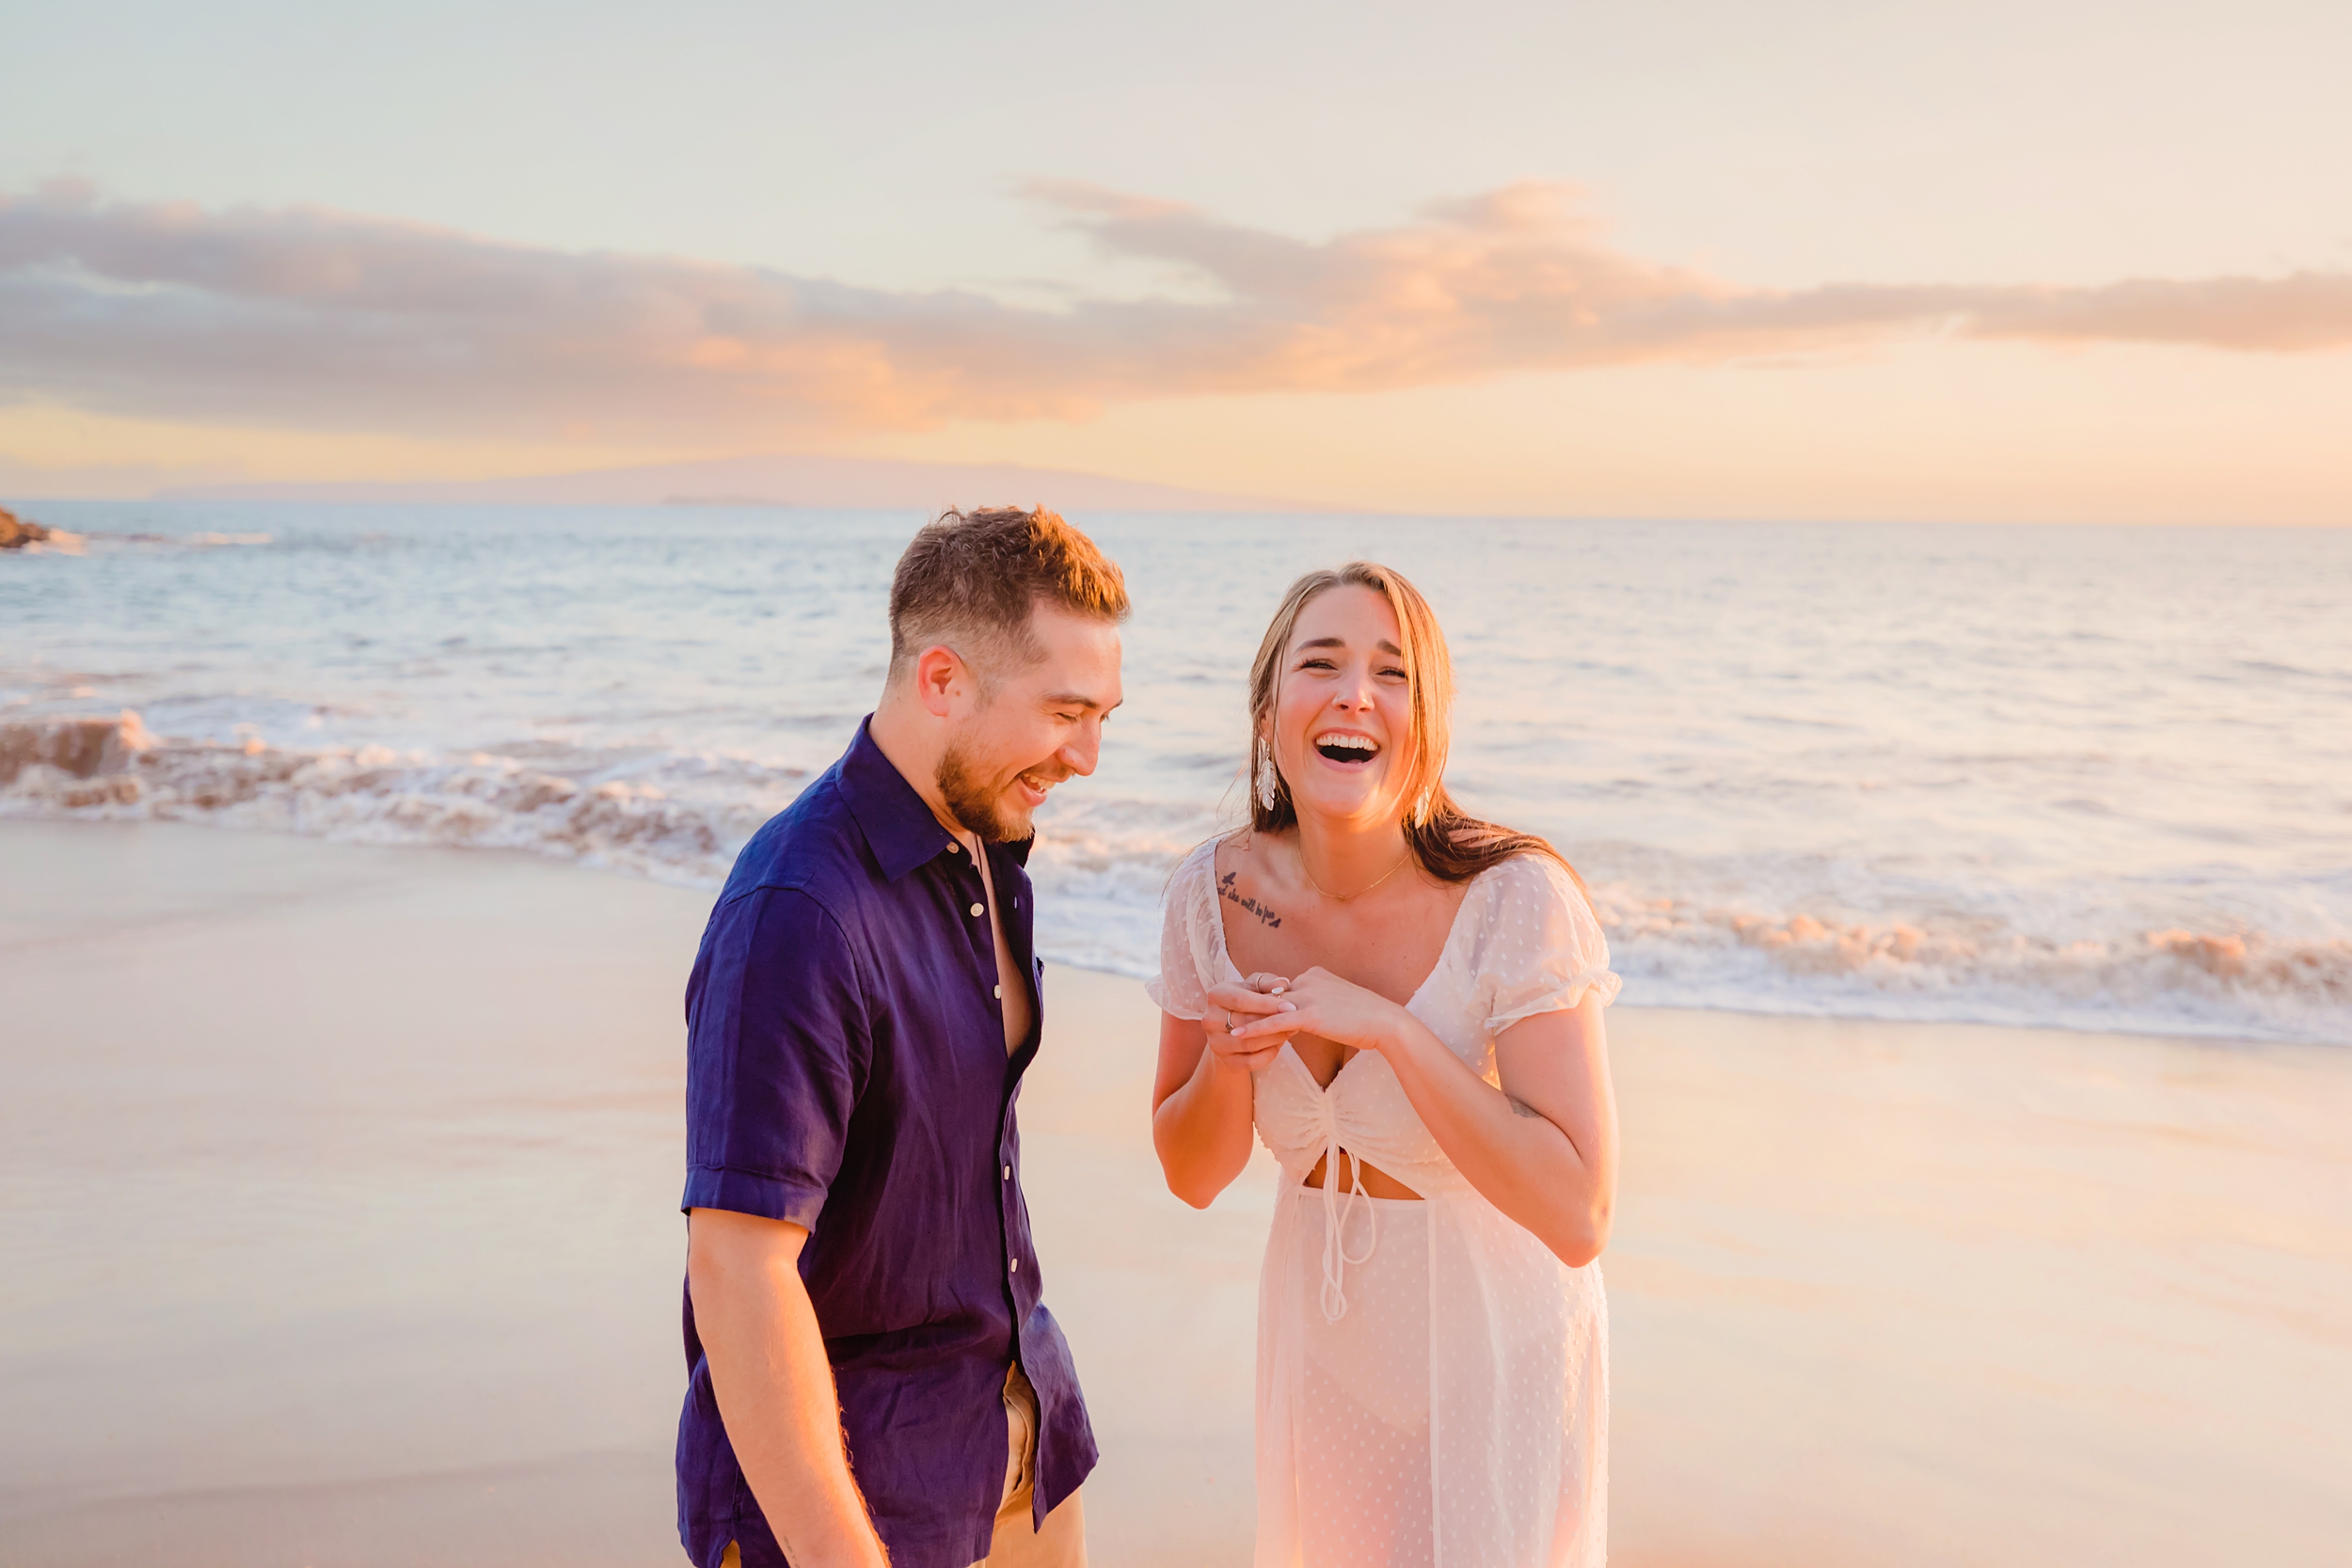 Woman looks at the camera and laughs while holding her engagement ring after her boyfriend proposes to her on the beach in Wailea.